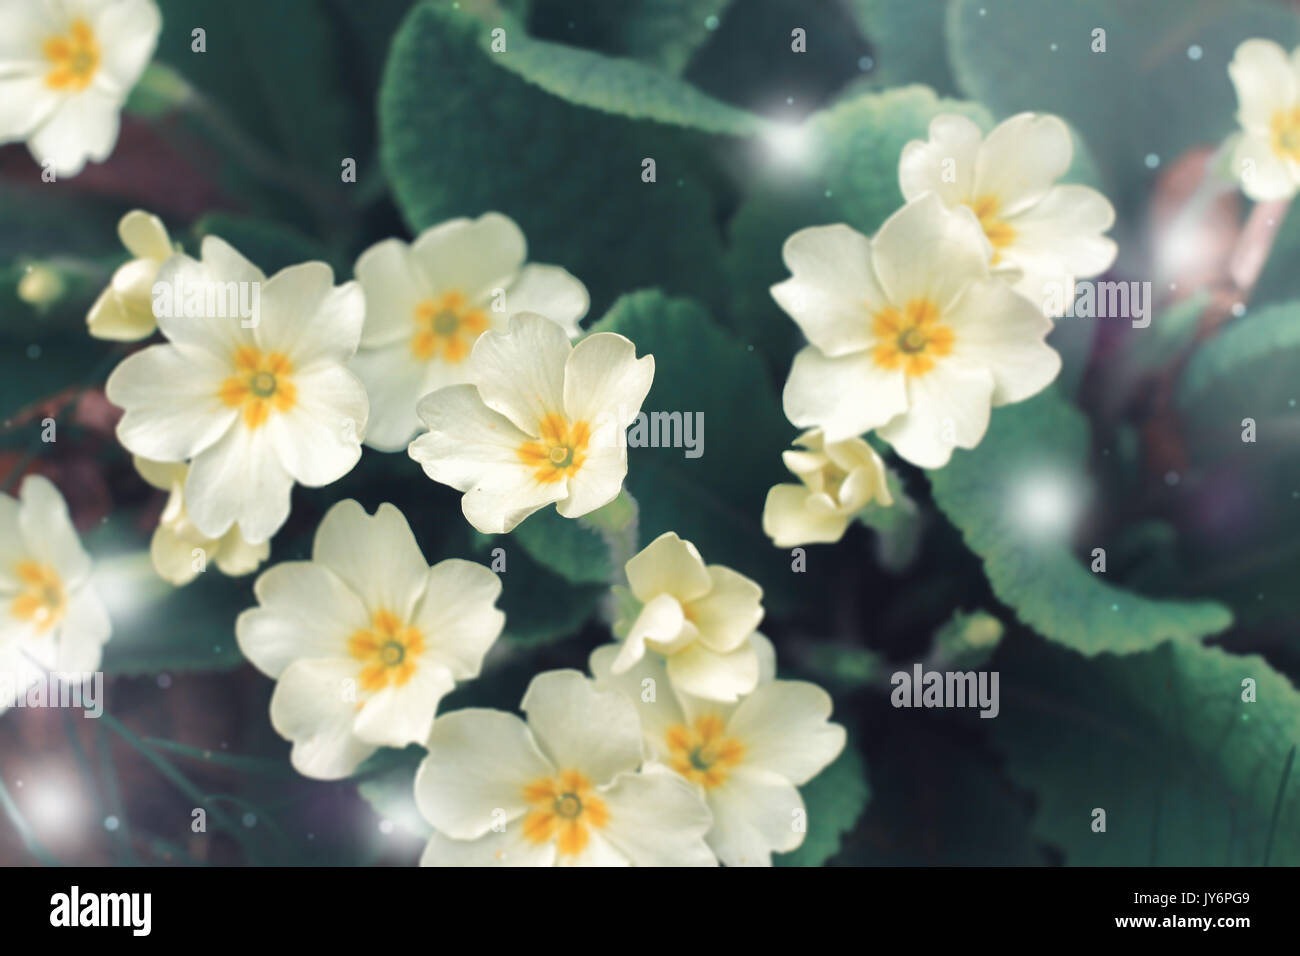 British spring Primroses grass flower in winter season with fantacy filter Stock Photo